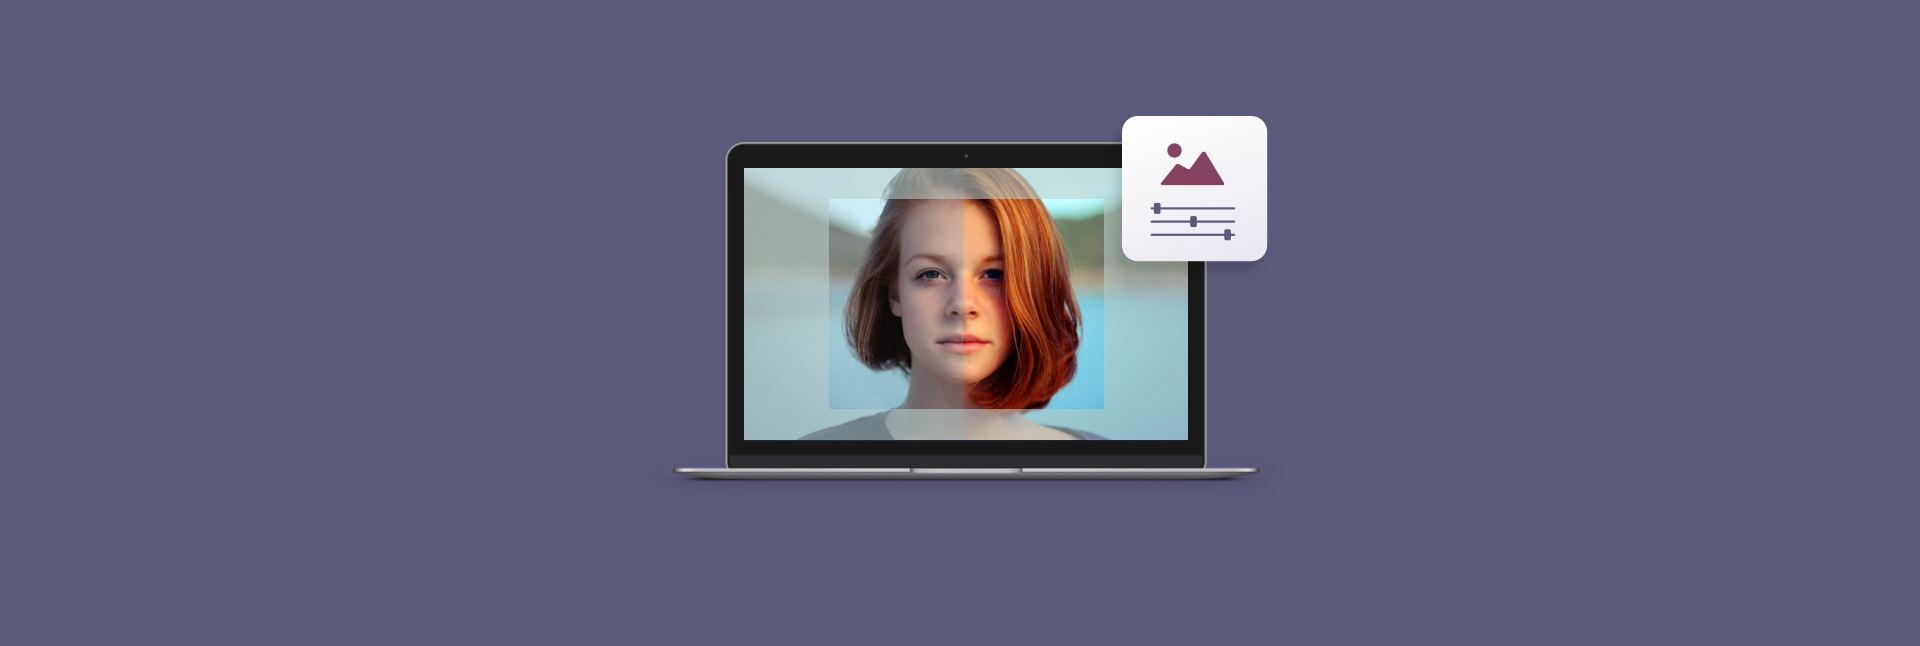 best phot editing software for mac